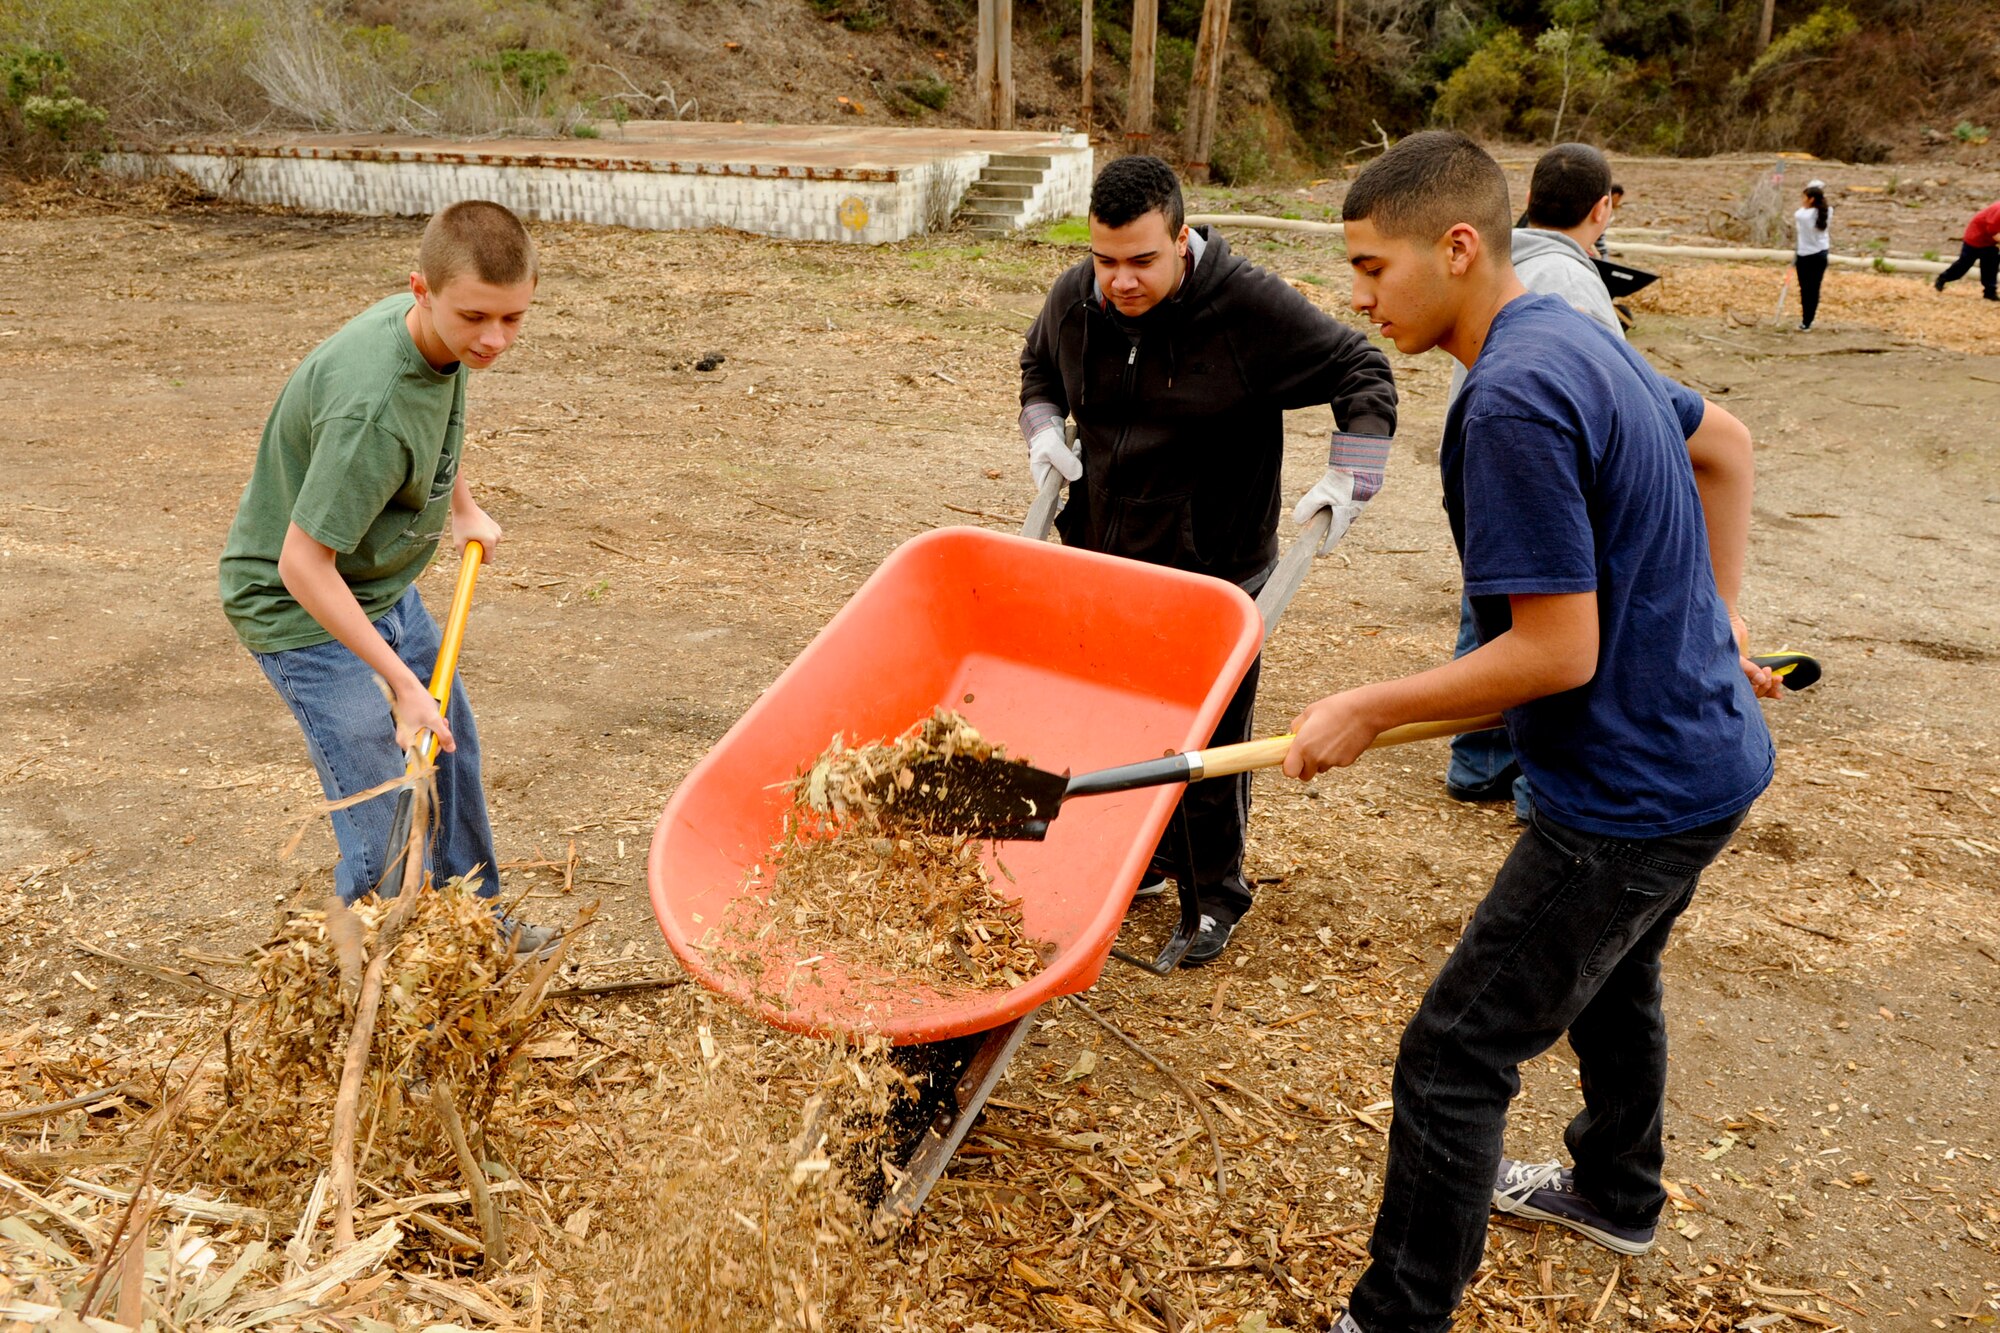 VANDENBERG AIR FORCE BASE, Calif. -- Bakersfield High School Air Force Junior Reserve Officers' Training Corps members scoop mulch into a wheel barrel at Honda Creek on South base here Friday, Dec. 14, 2012. The cadets were spreading mulch as part of community service performed on the installation as part of their duties in JROTC. (U.S. Air Force photo/Staff Sgt. Levi Riendeau)